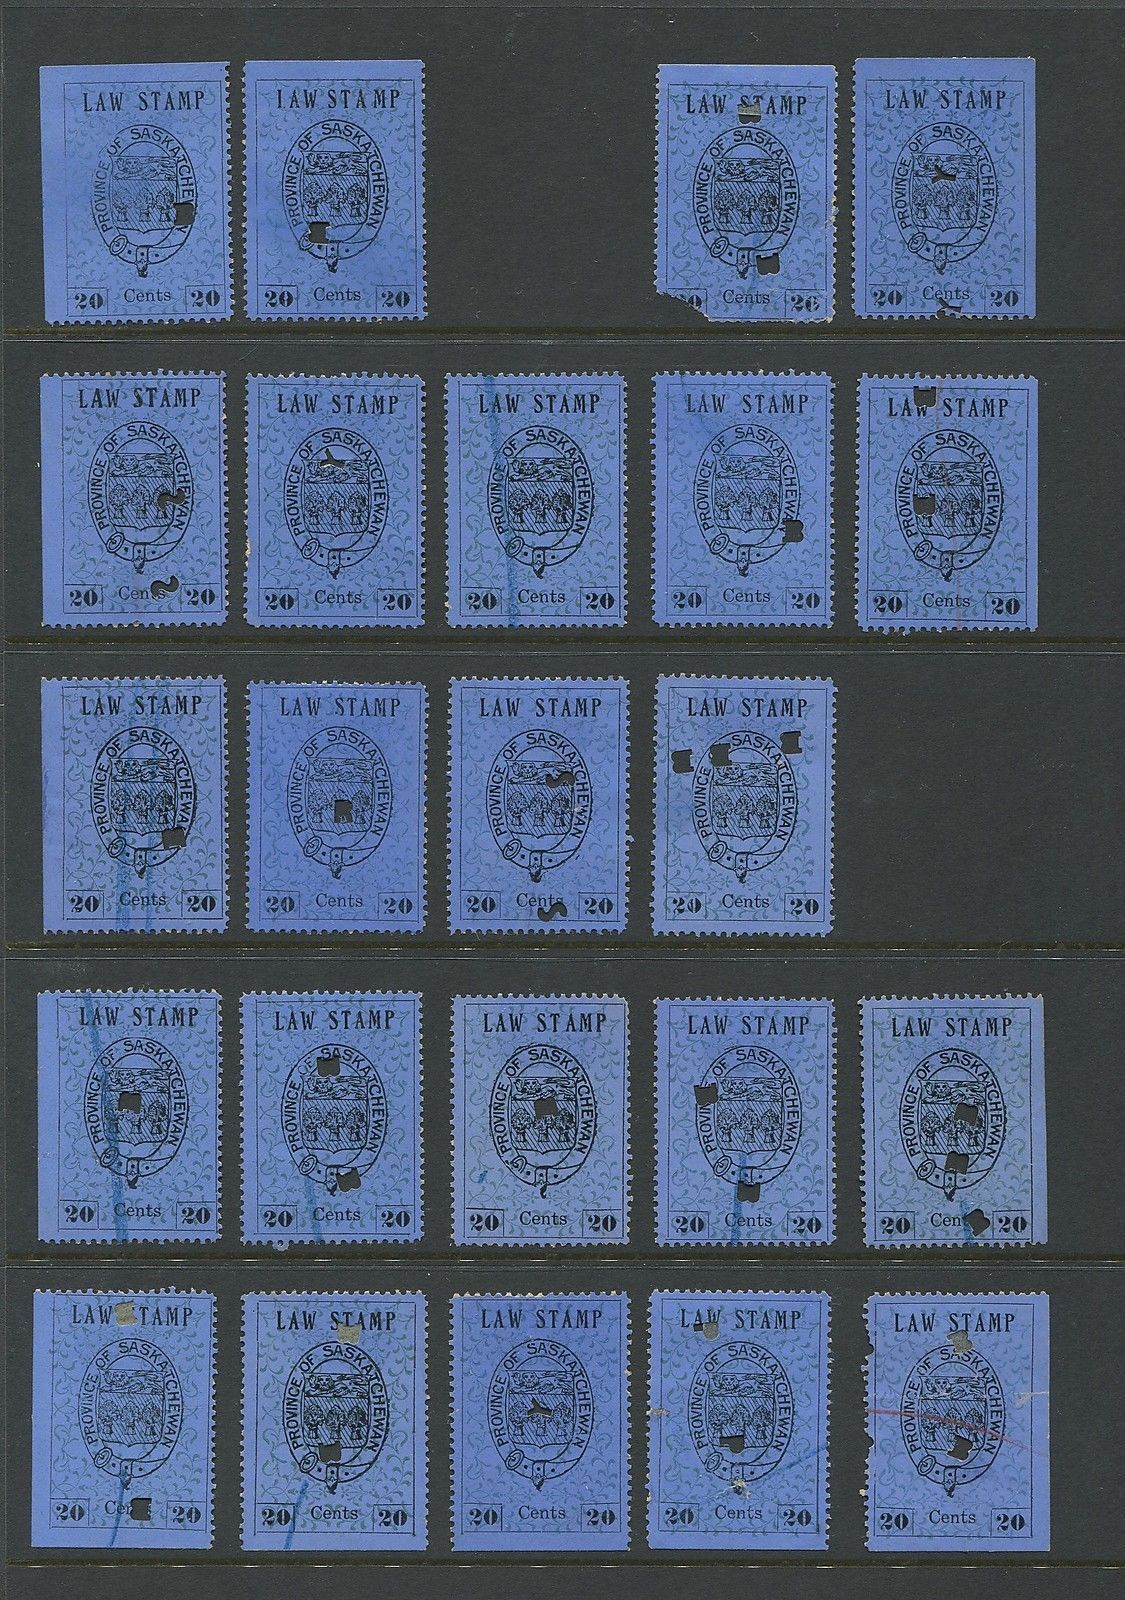 0003SL1709 - SL3 - Used Partially Reconstructed Sheet - Deveney Stamps Ltd. Canadian Stamps